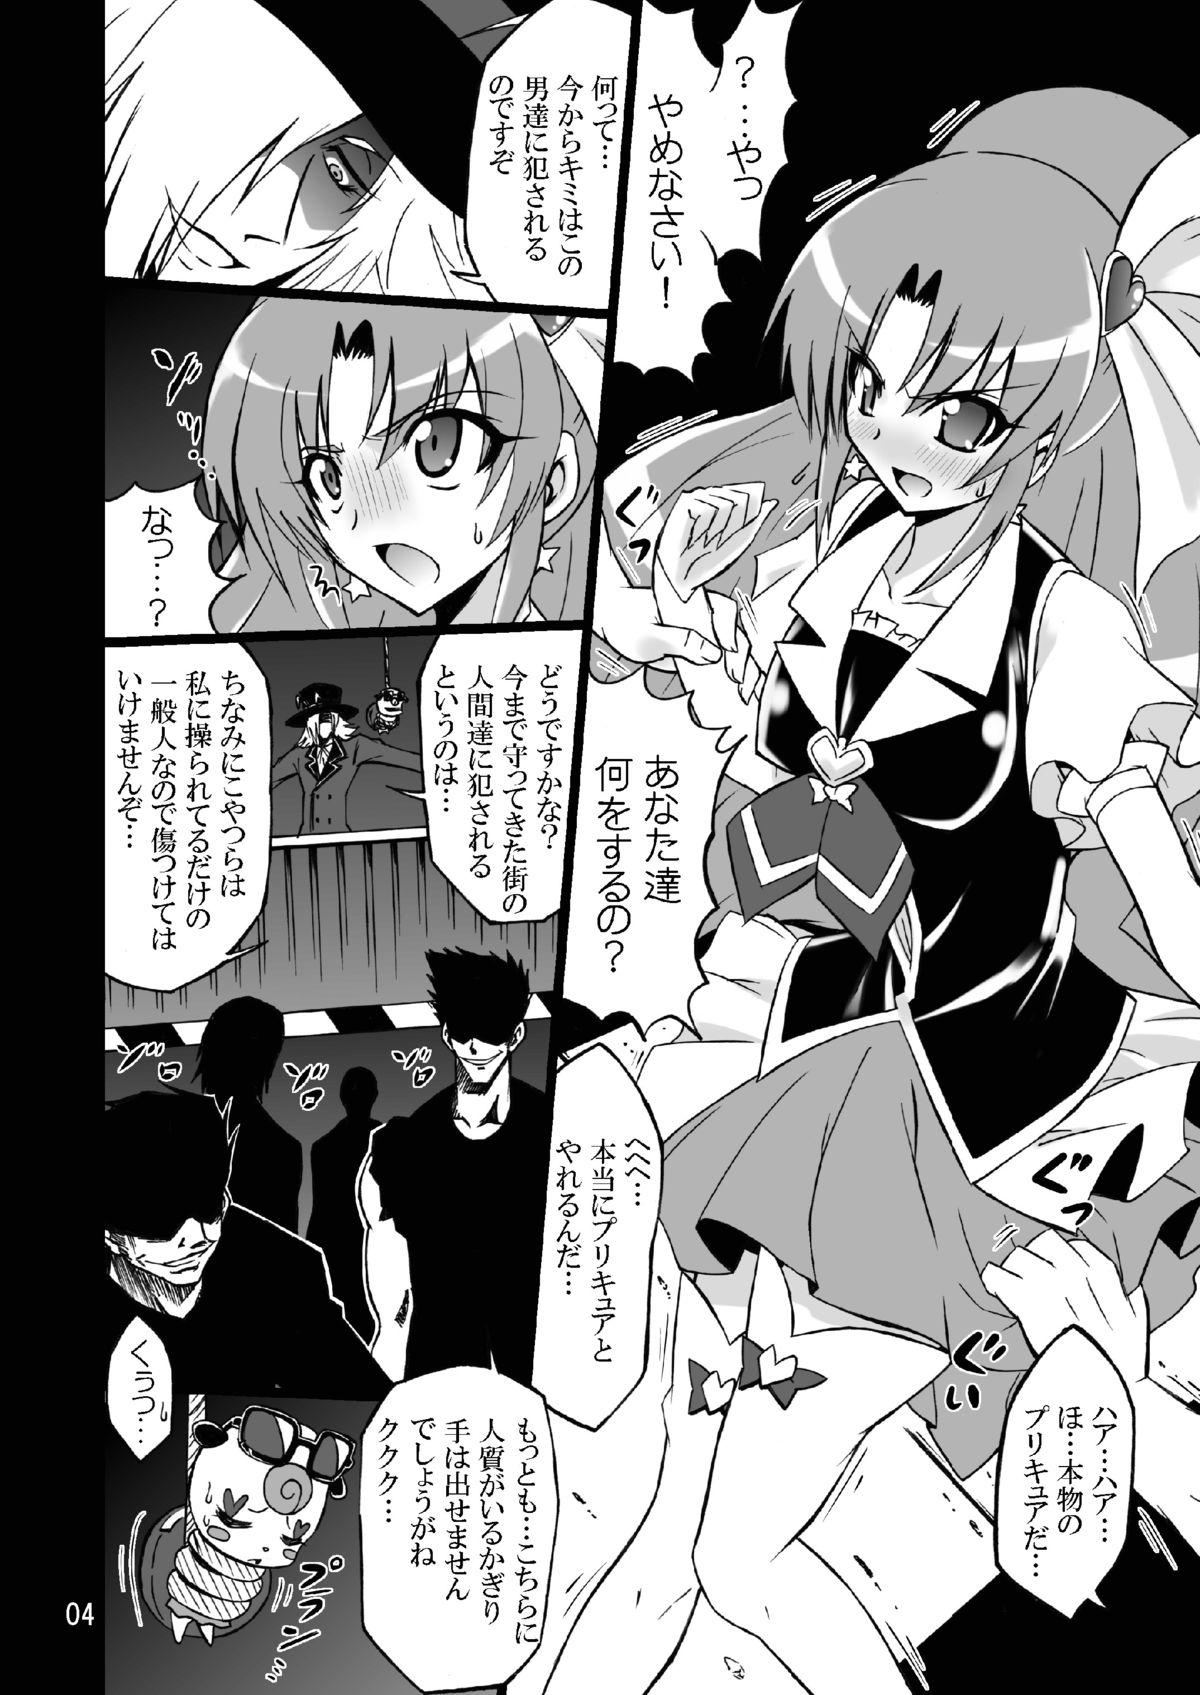 Pale WHEEL of FORTUNE - Dokidoki precure Happinesscharge precure Peru - Page 4